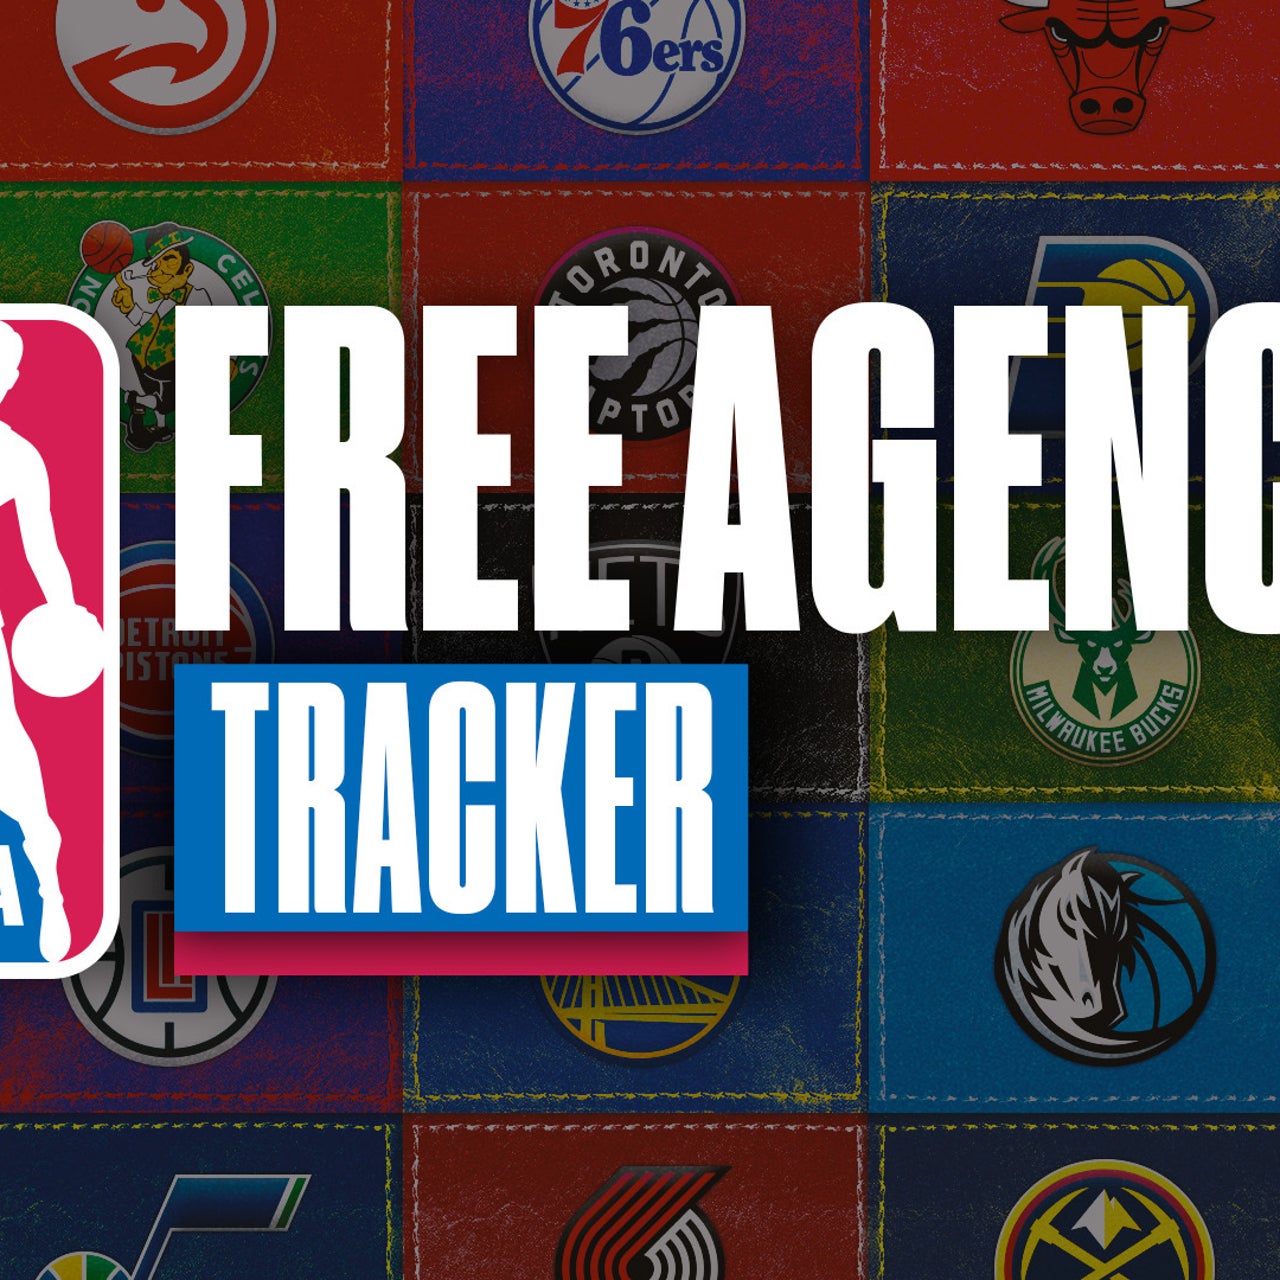 2023 NBA free agency tracker Live updates and latest rumors